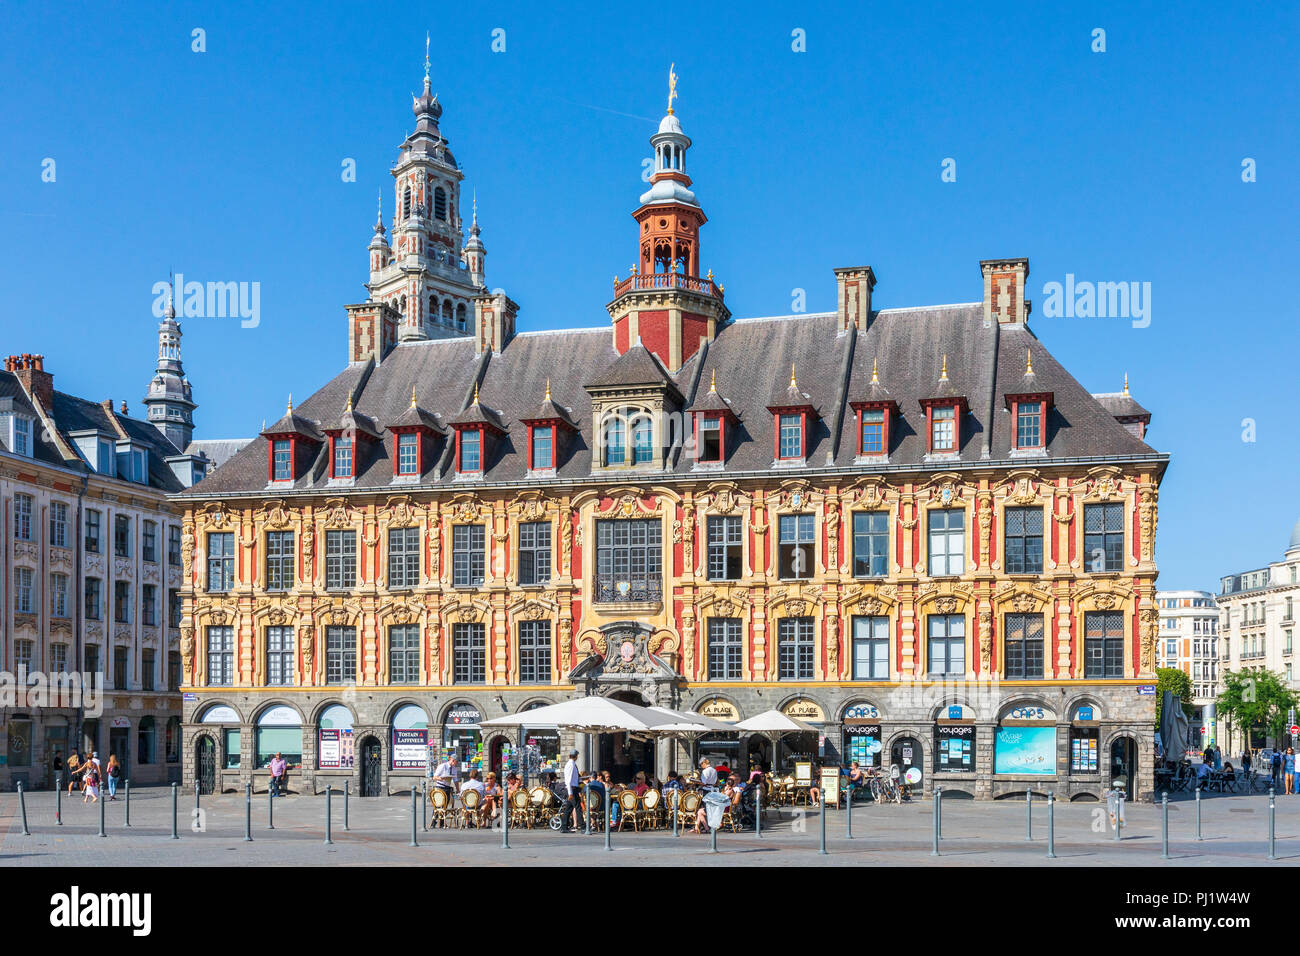 La Vielle Bourse de Lille, originally the Chamber of Commerce building, situated in Grand Place near to Place du general de Gaulle, now housing cafes, Stock Photo